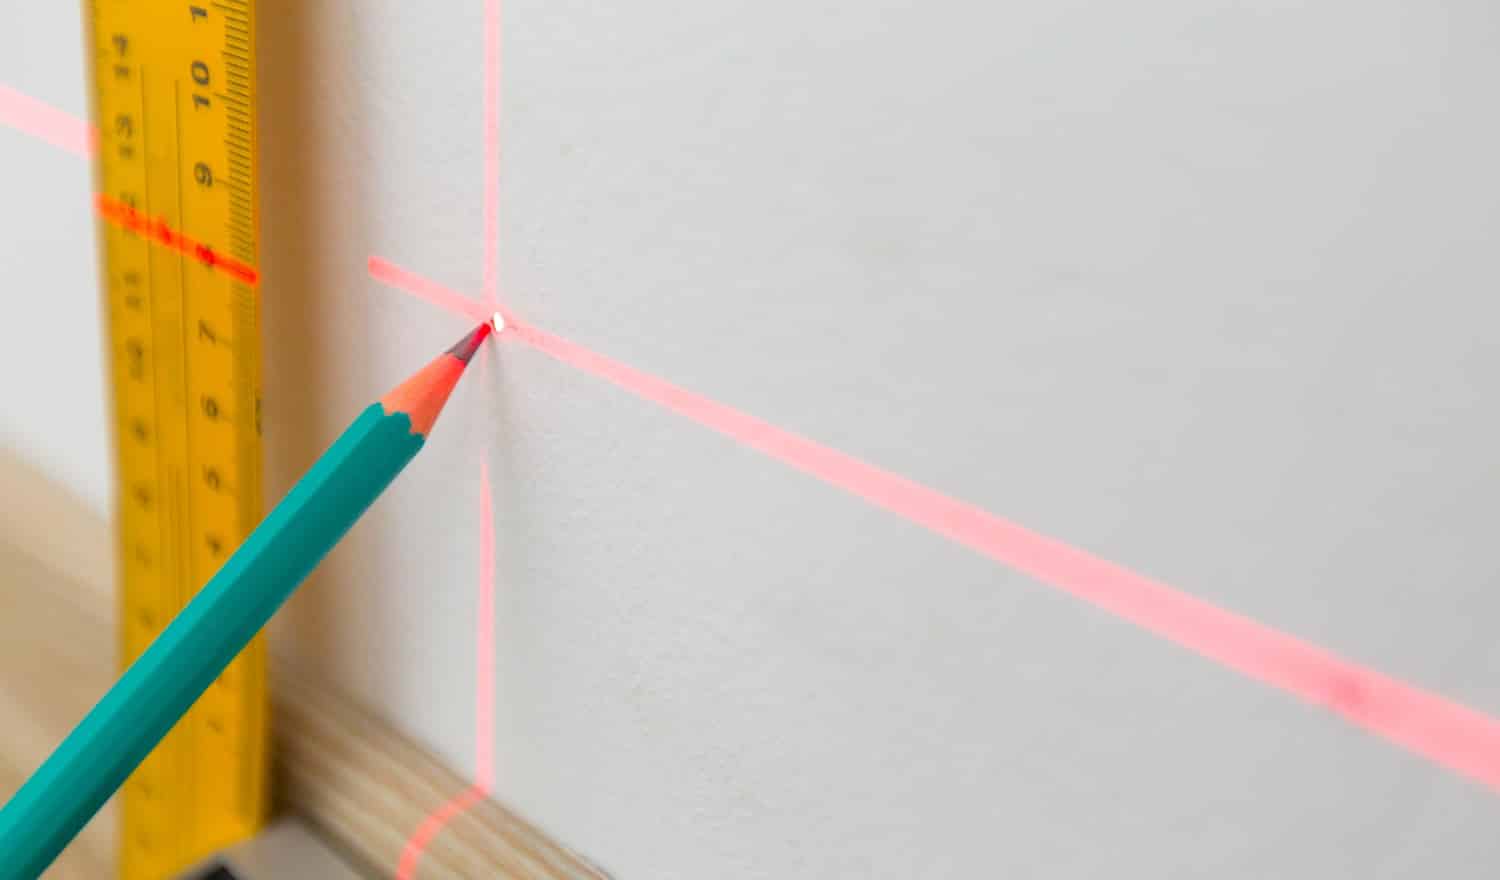 Laser level and lines on the wall